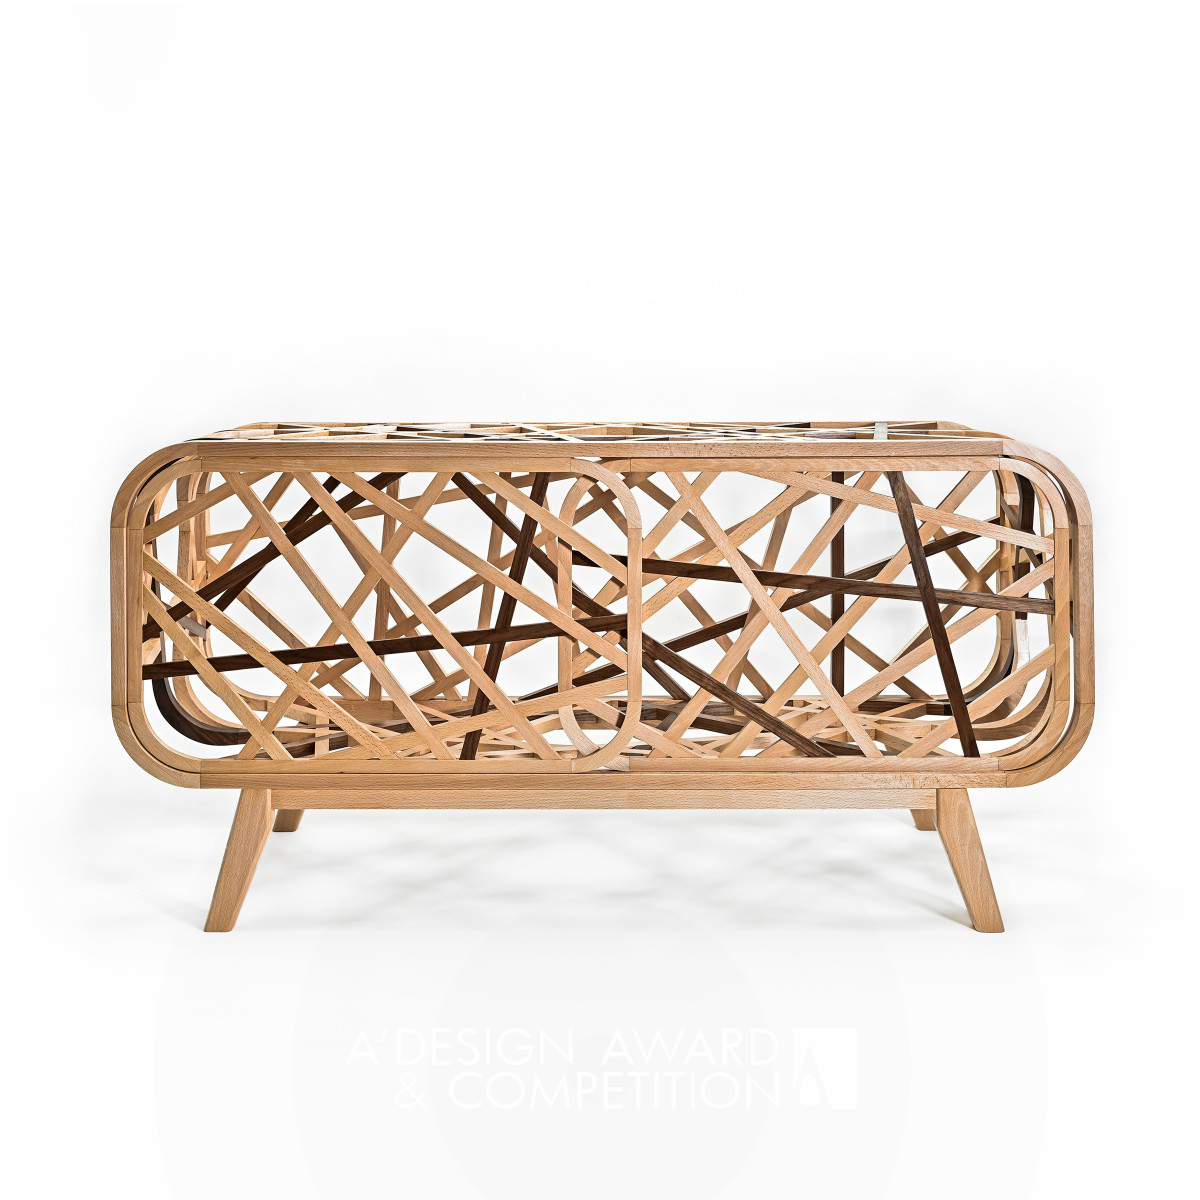 Yu-Ching Chen wins Bronze at the prestigious A' Furniture Design Award with Interweave Cabinet.